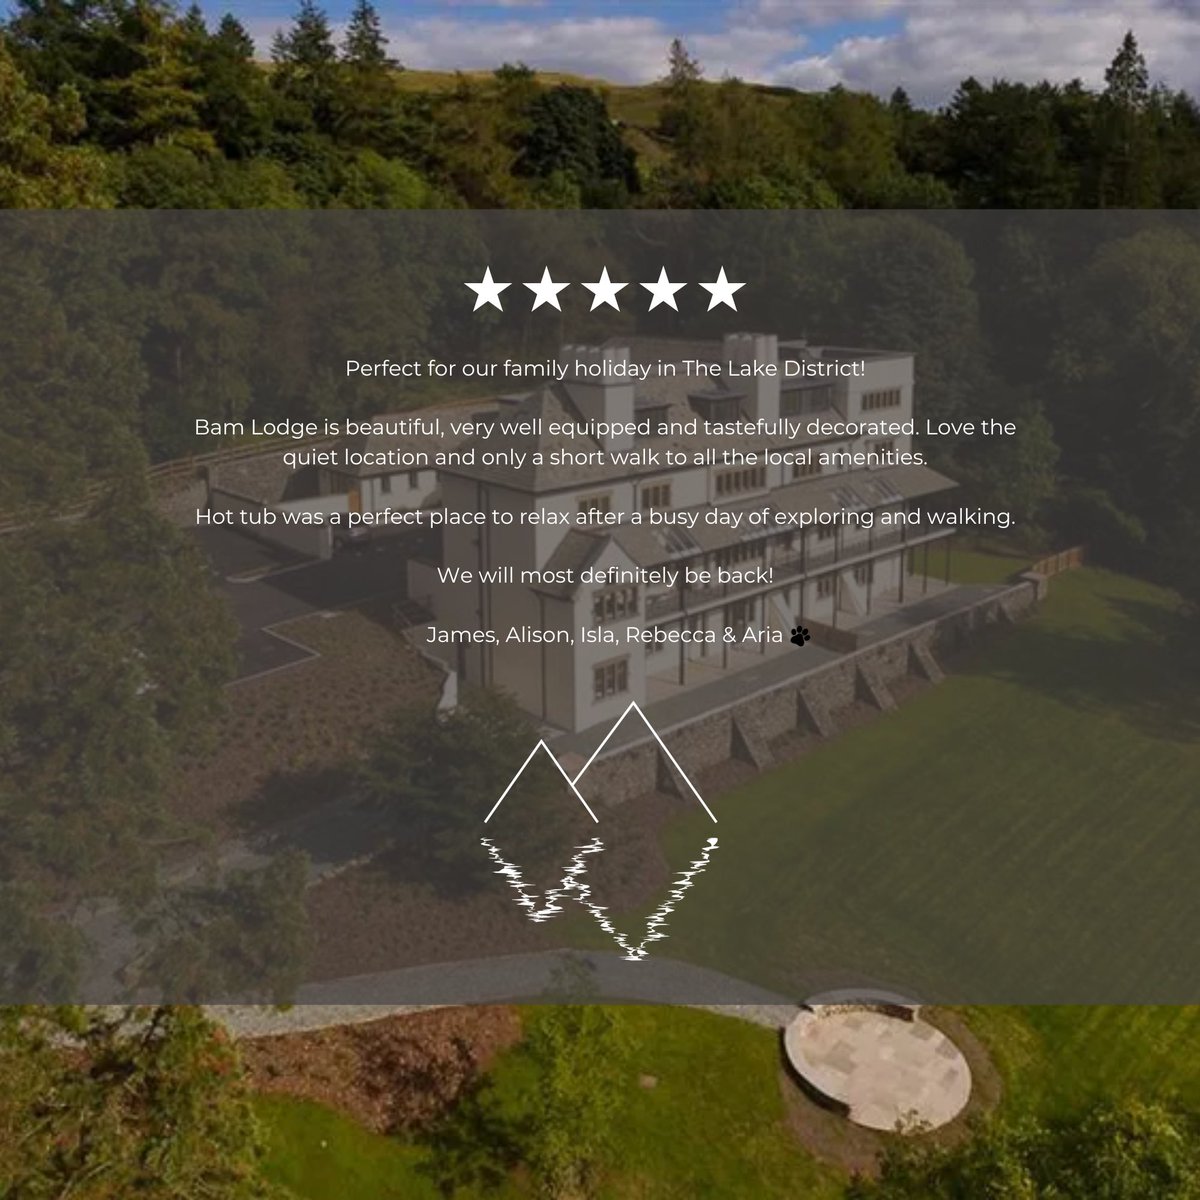 Another fantastic review from a guest at Bam Lodge!

Your reviews mean a lot to us, and we can’t wait to welcome you back!

Book your next getaway at Bam Lodge now!

bamlodge.co.uk/#booking

#BamLodge #Windemere #HolidayLet #UKHoliday #LakeDistrict #Review #Feedback #BookNow